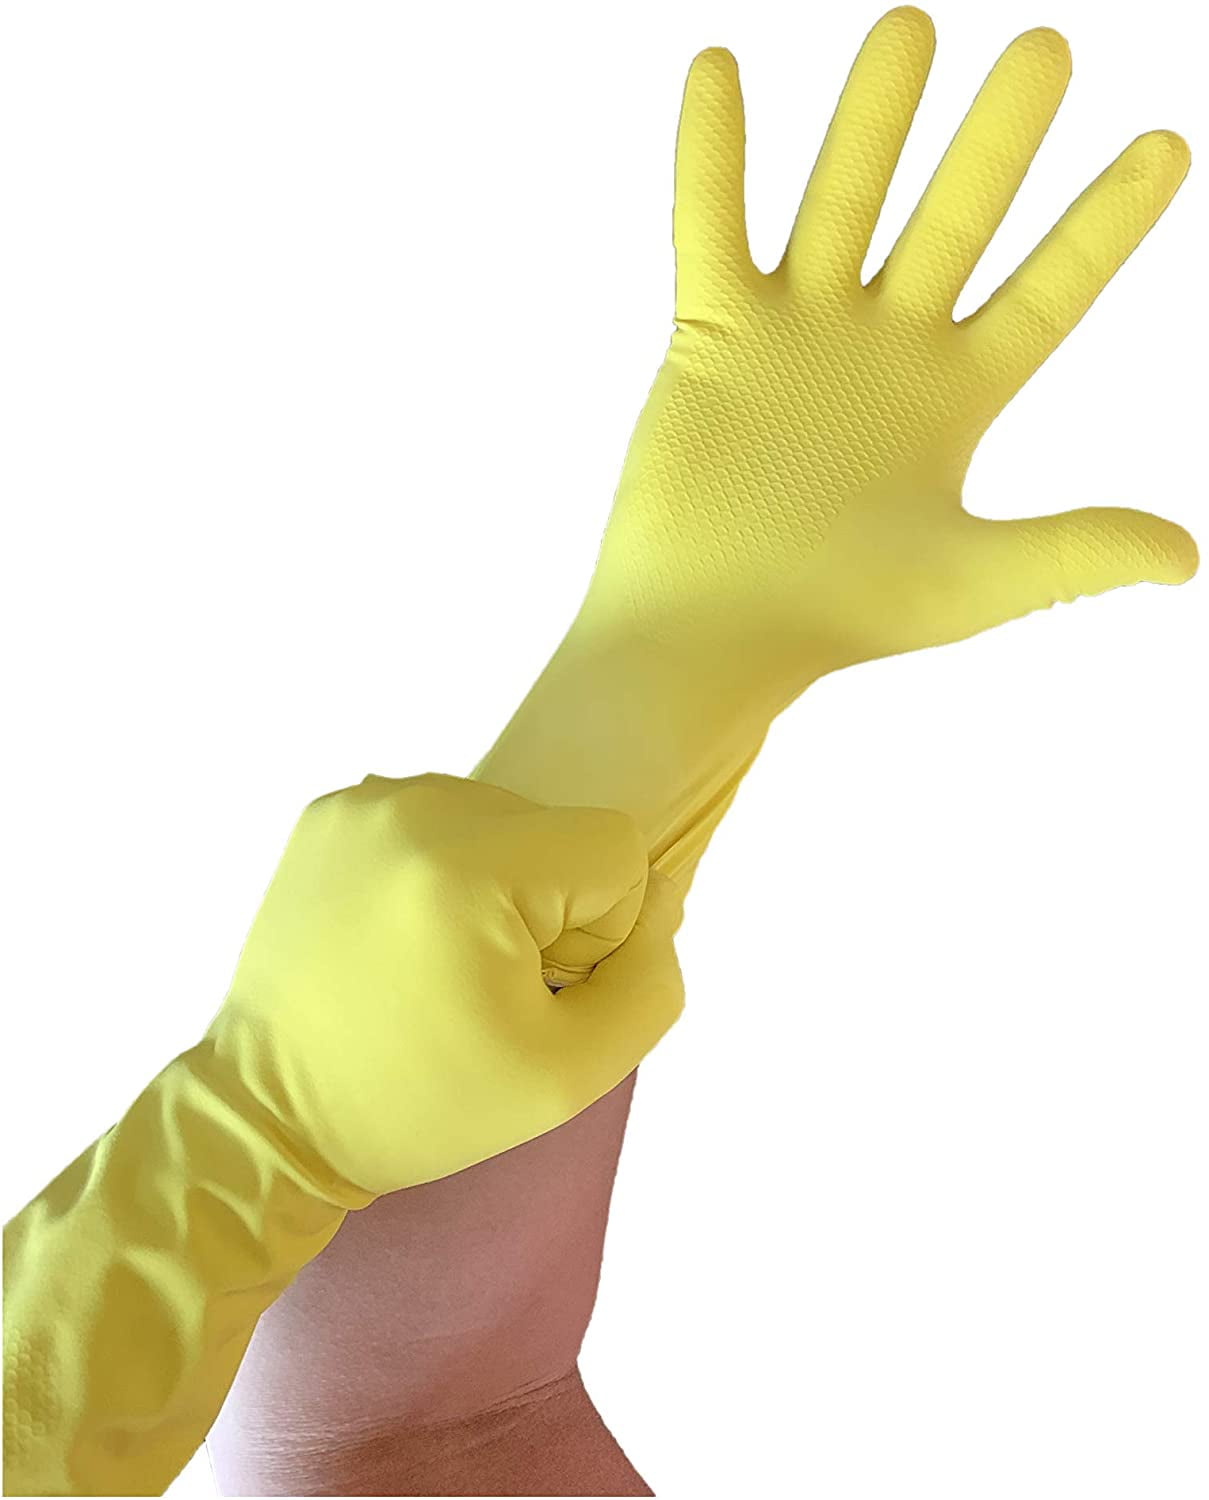 12 PAIRS OF YELLOW LATEX GLOVES HOUSEHOLD WASHING UP CLEANING HYGIENE PROTECTIVE 